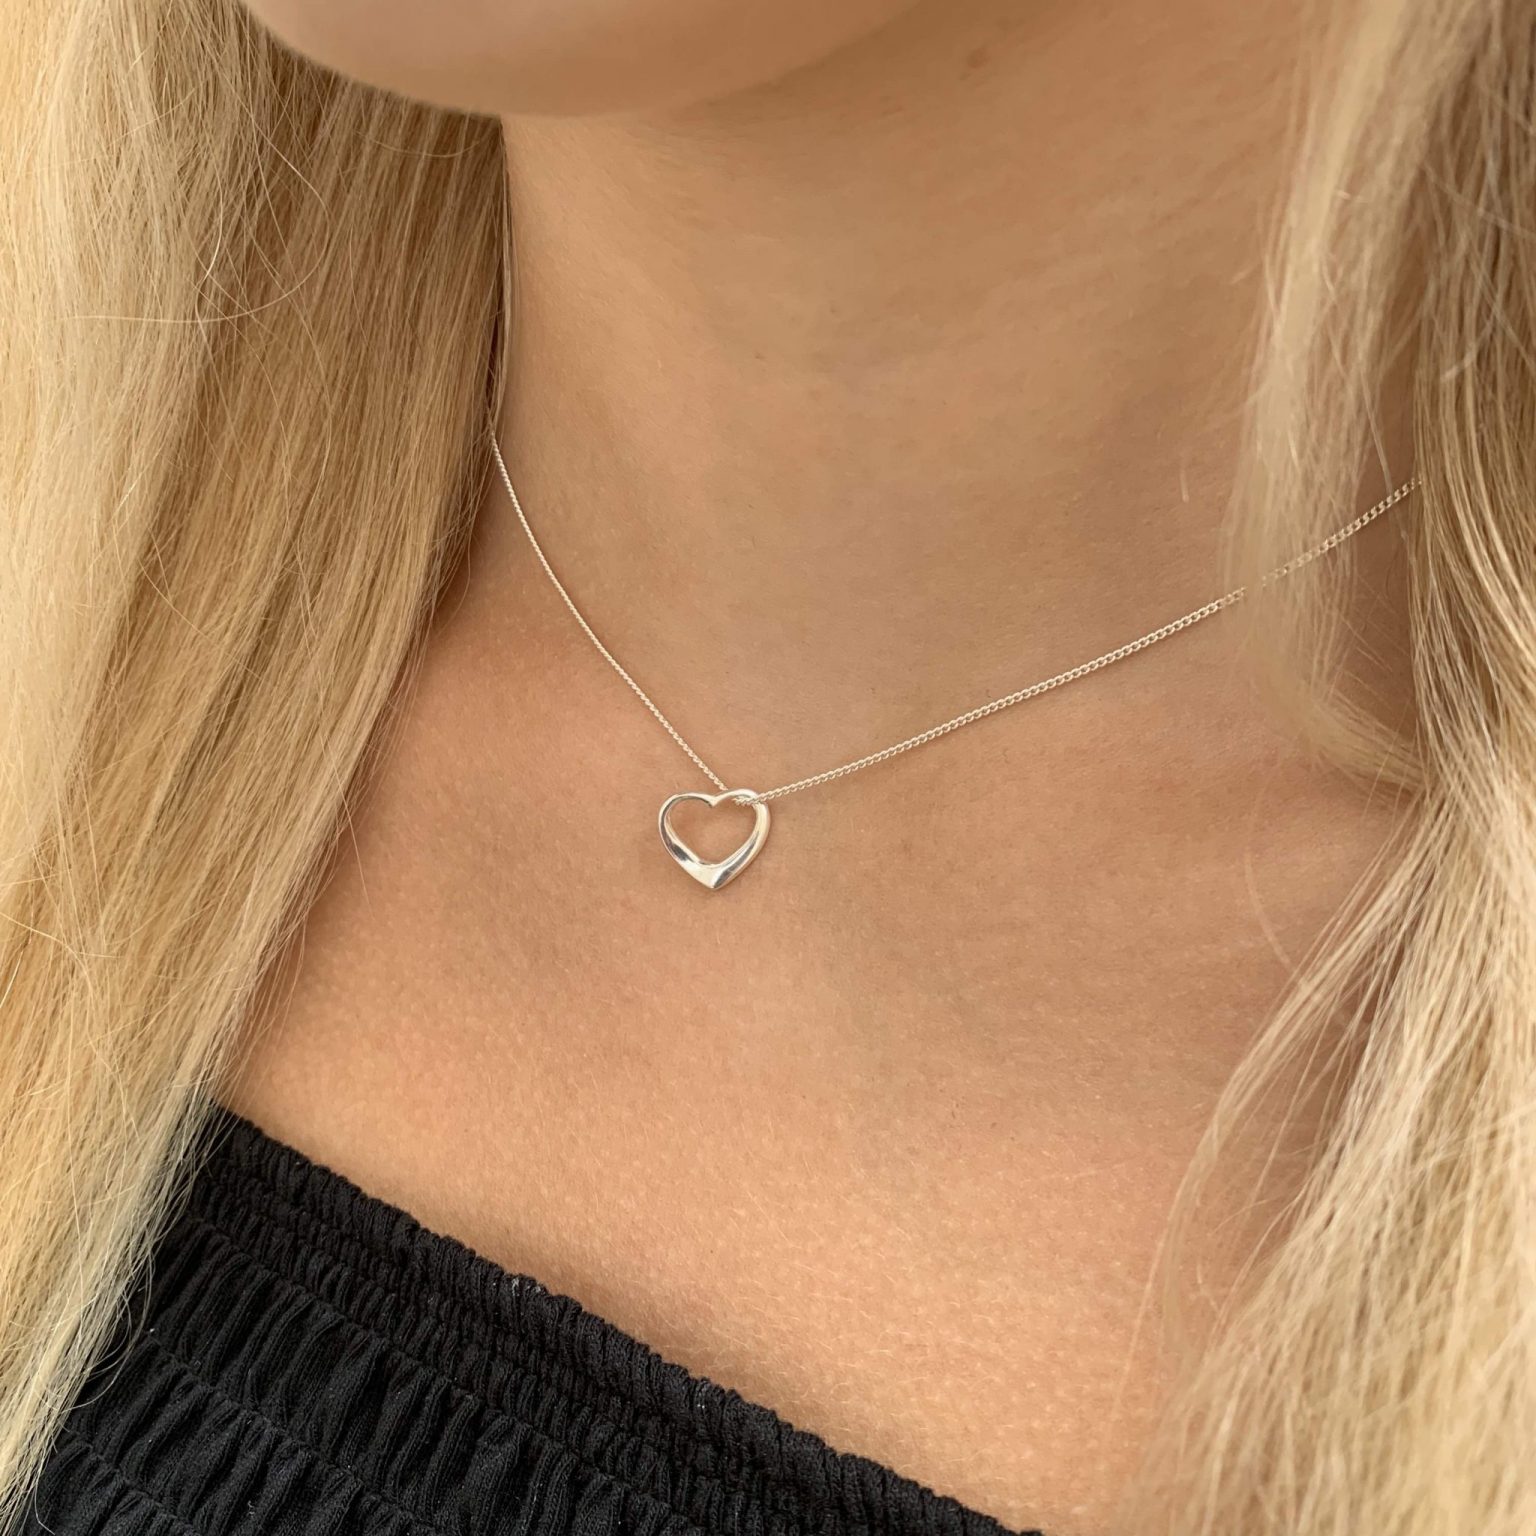 Floating Heart Necklace - The Silver Shop of Bath